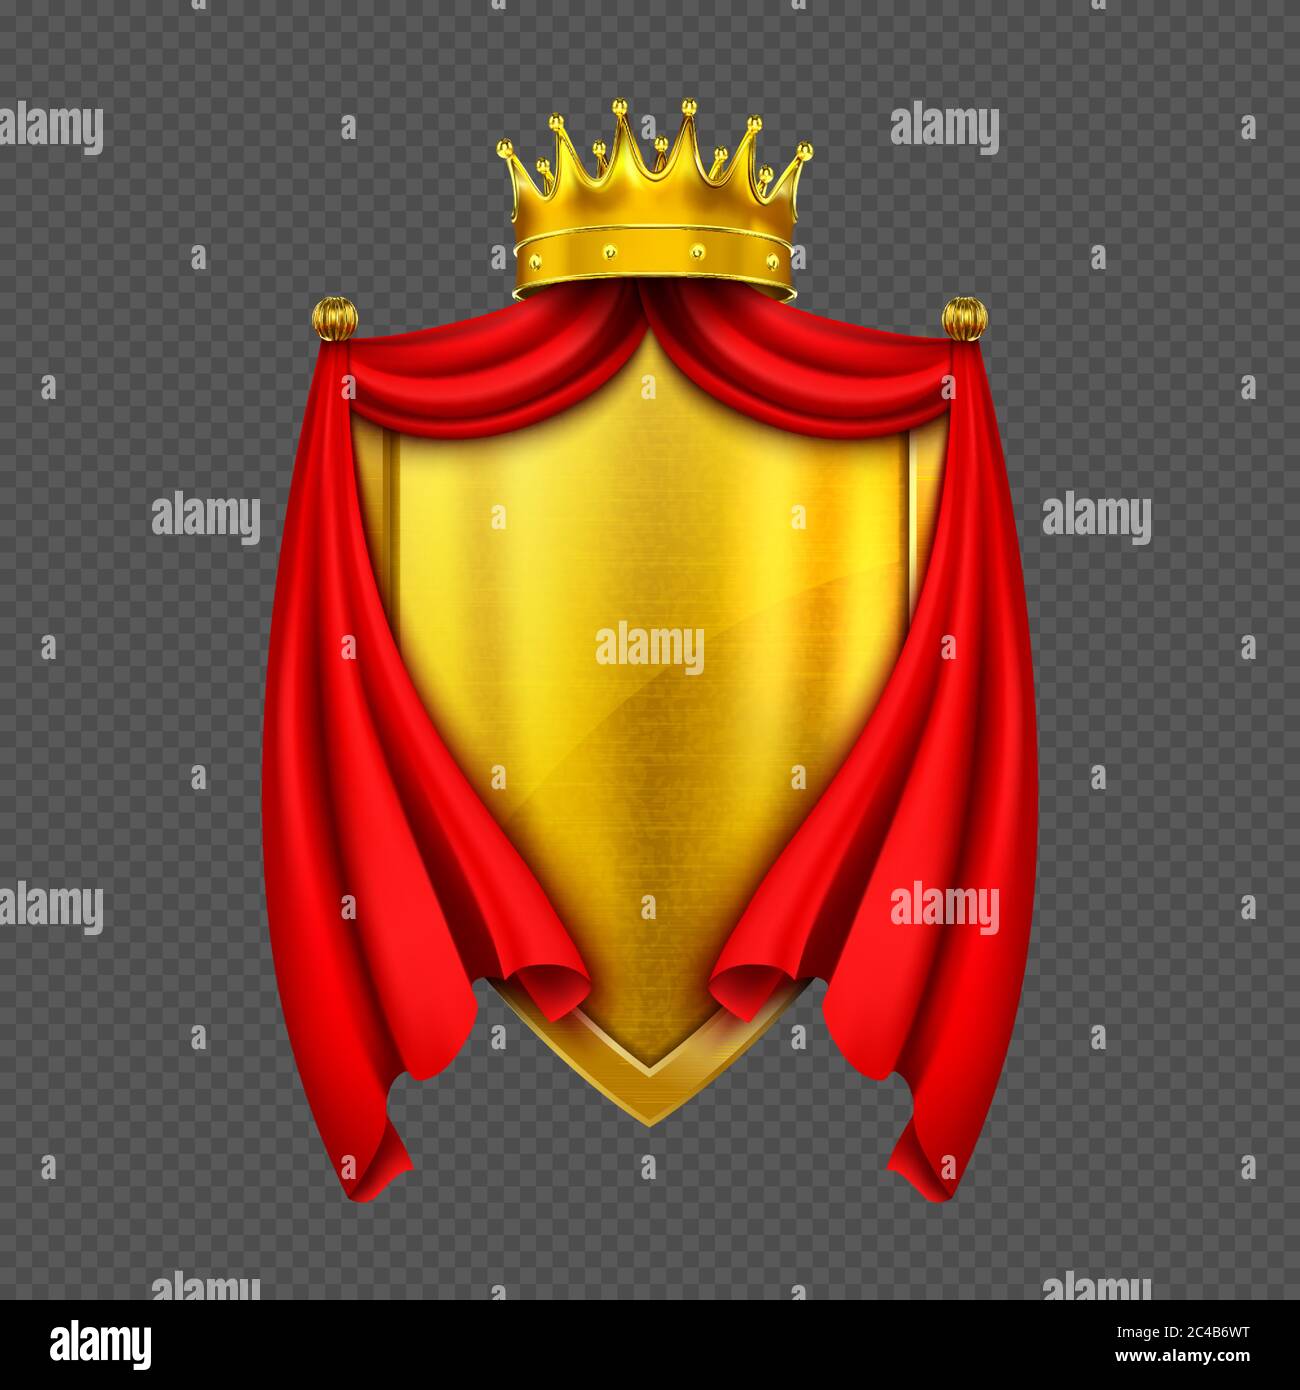 Coat of arms with golden monarch crown, shield and red folded cloth or cape, heraldic royal emblem isolated on transparent background. Medieval gold king emperor sign. Realistic 3d vector illustration Stock Vector